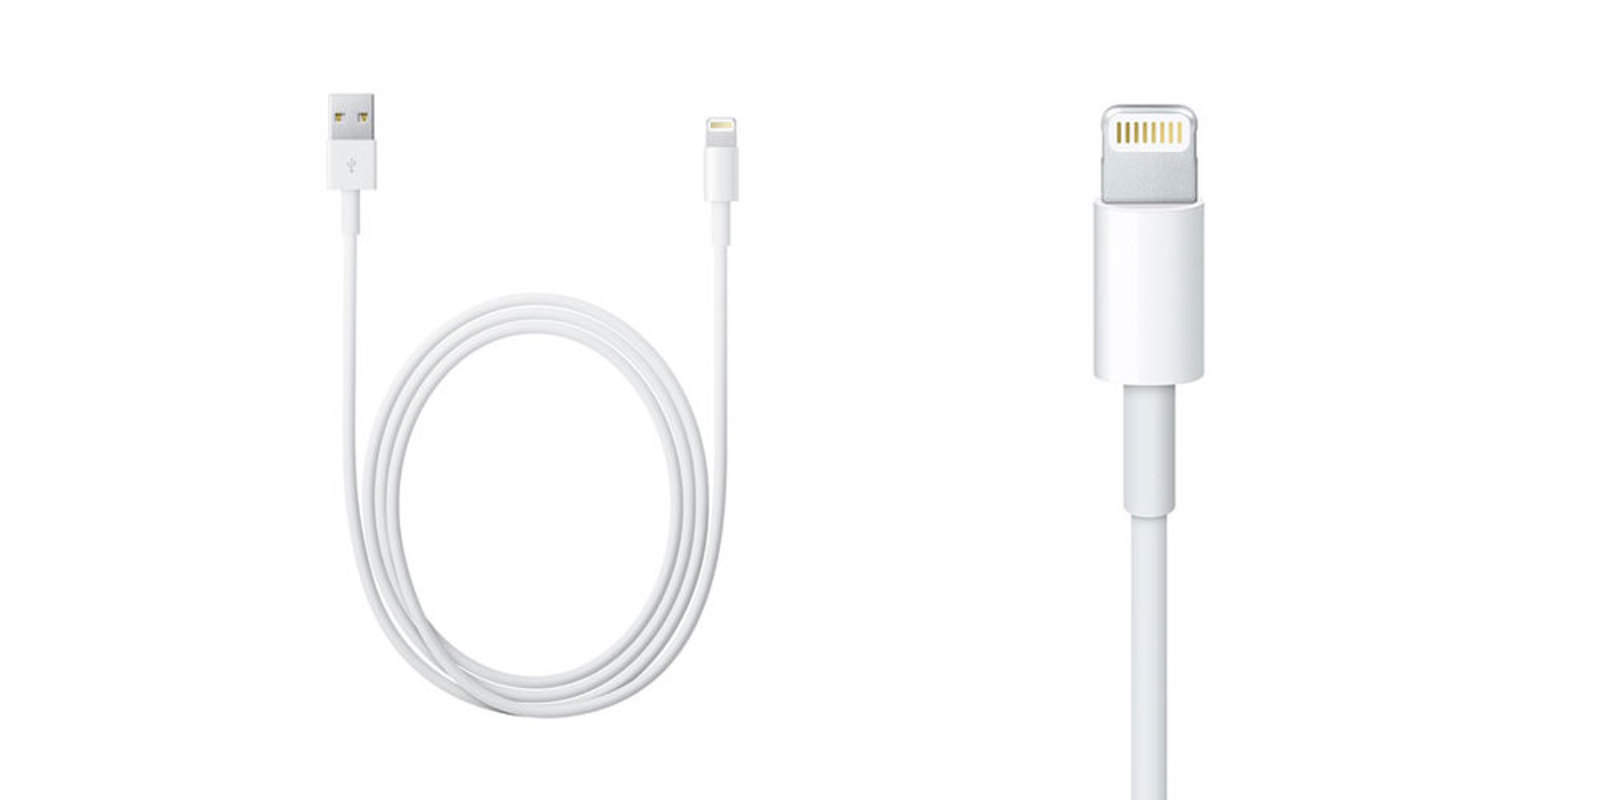 These two, 2-meter long Lightning cables cost less than a single standard one.